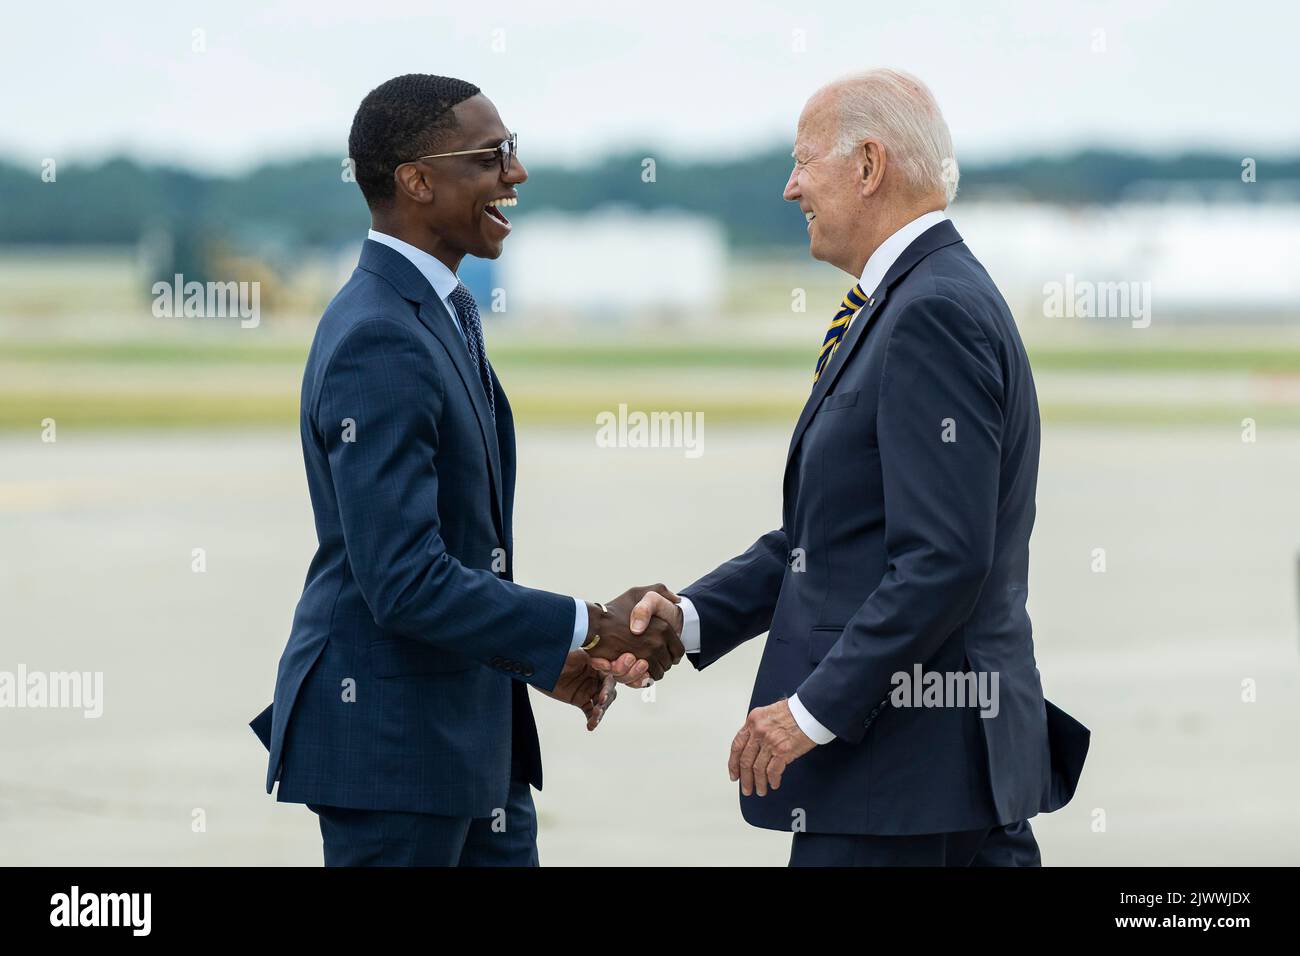 President Joe Biden disembarks Air Force One at Cleveland Hopkins International Airport in Cleveland, Ohio Wednesday, July 6, 2022, and is greeted by Cleveland Mayor Justin Bibb. (Official White House Photo by Adam Schultz) Stock Photo